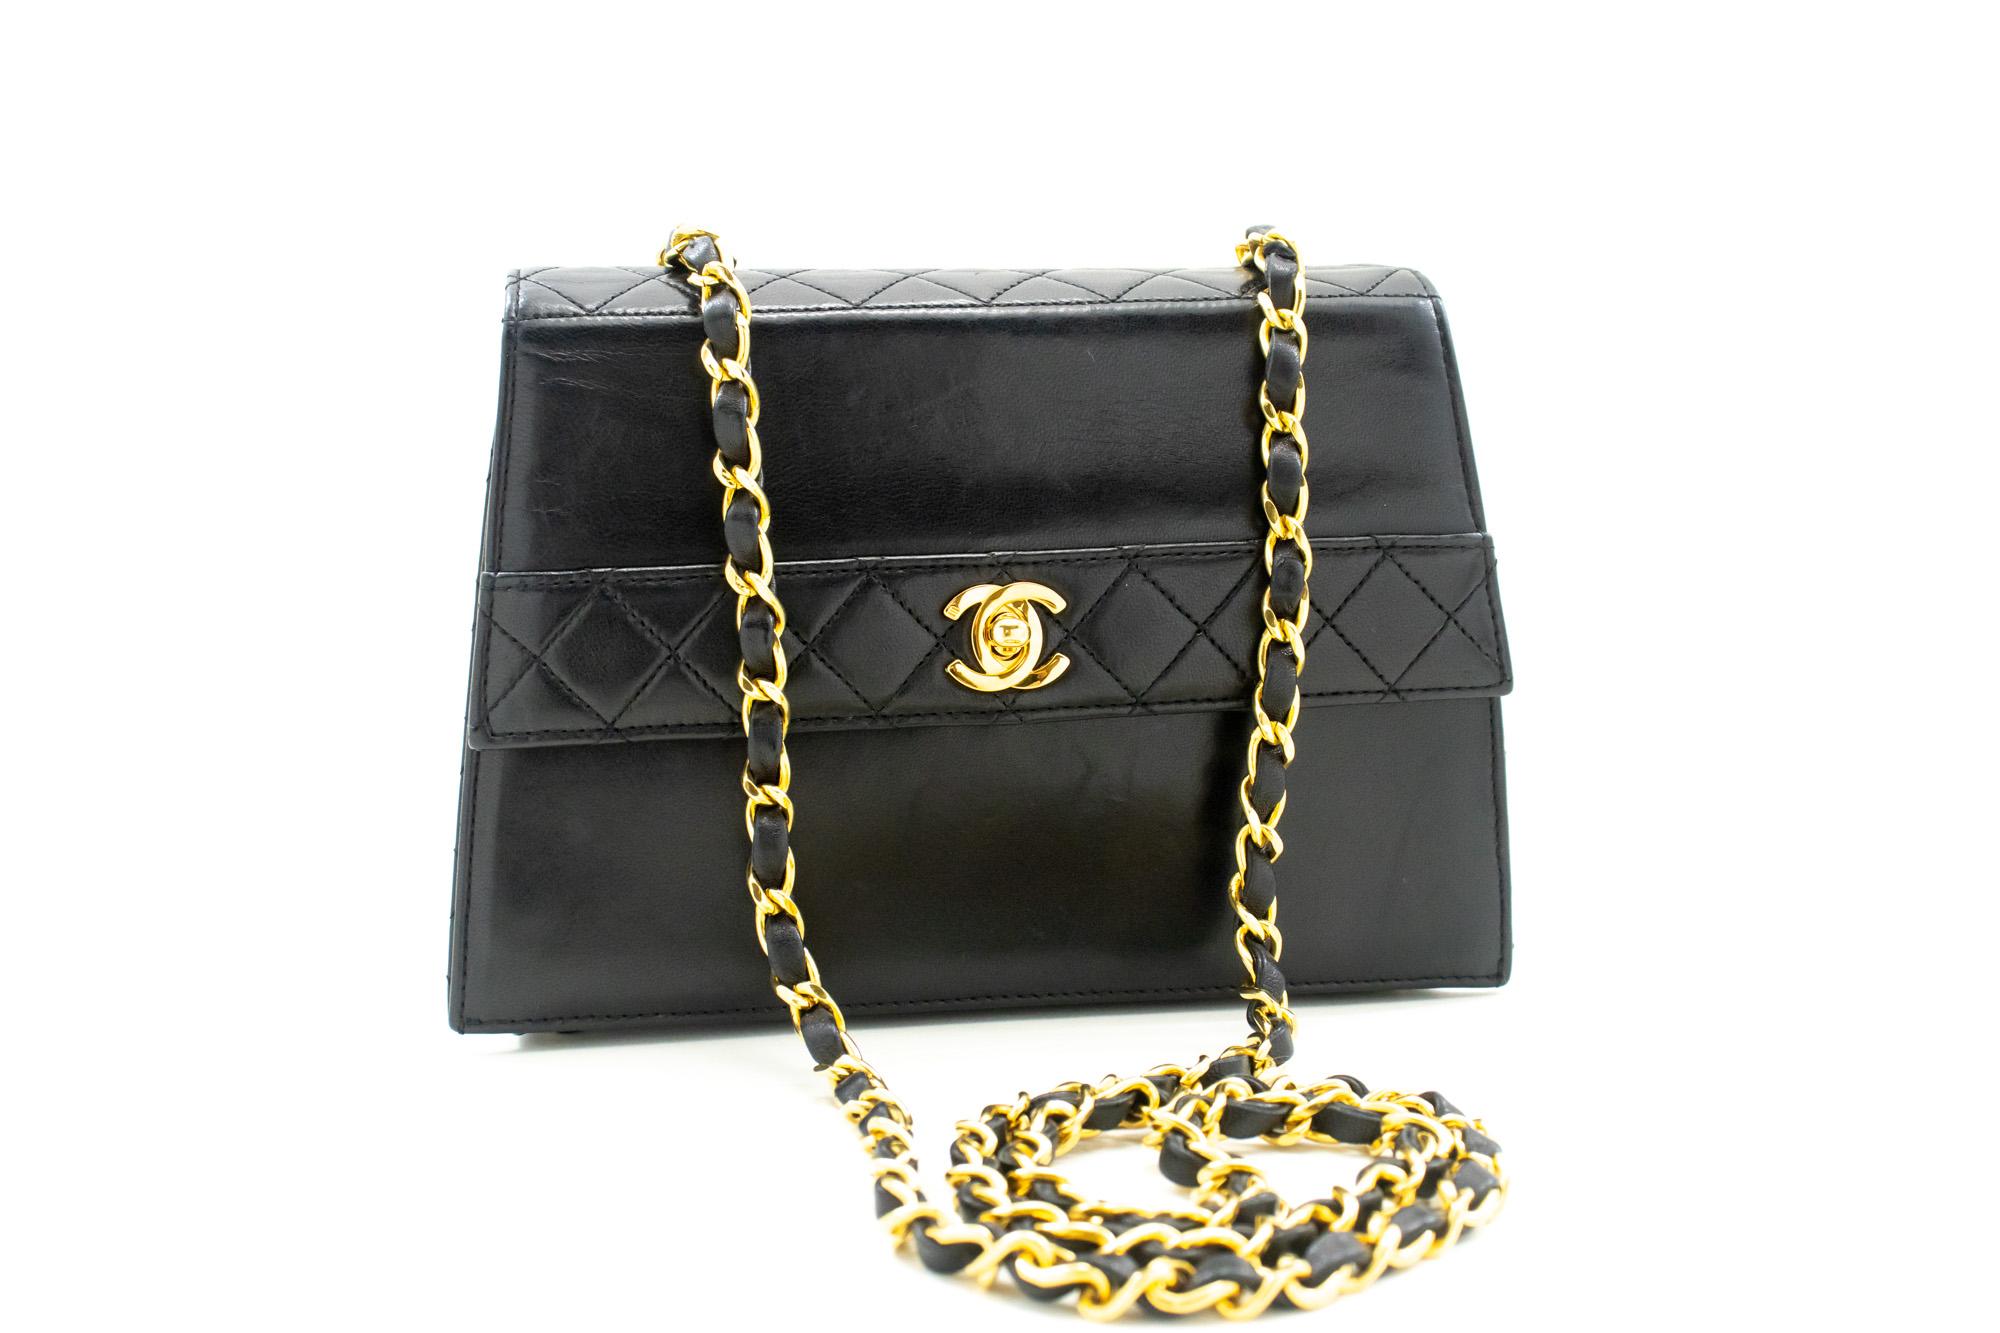 An authentic CHANEL Small Chain Shoulder Bag Black Quilted Single Flap made of black Lambskin. The color is Black. The outside material is Leather. The pattern is Solid. This item is Vintage / Classic. The year of manufacture would be